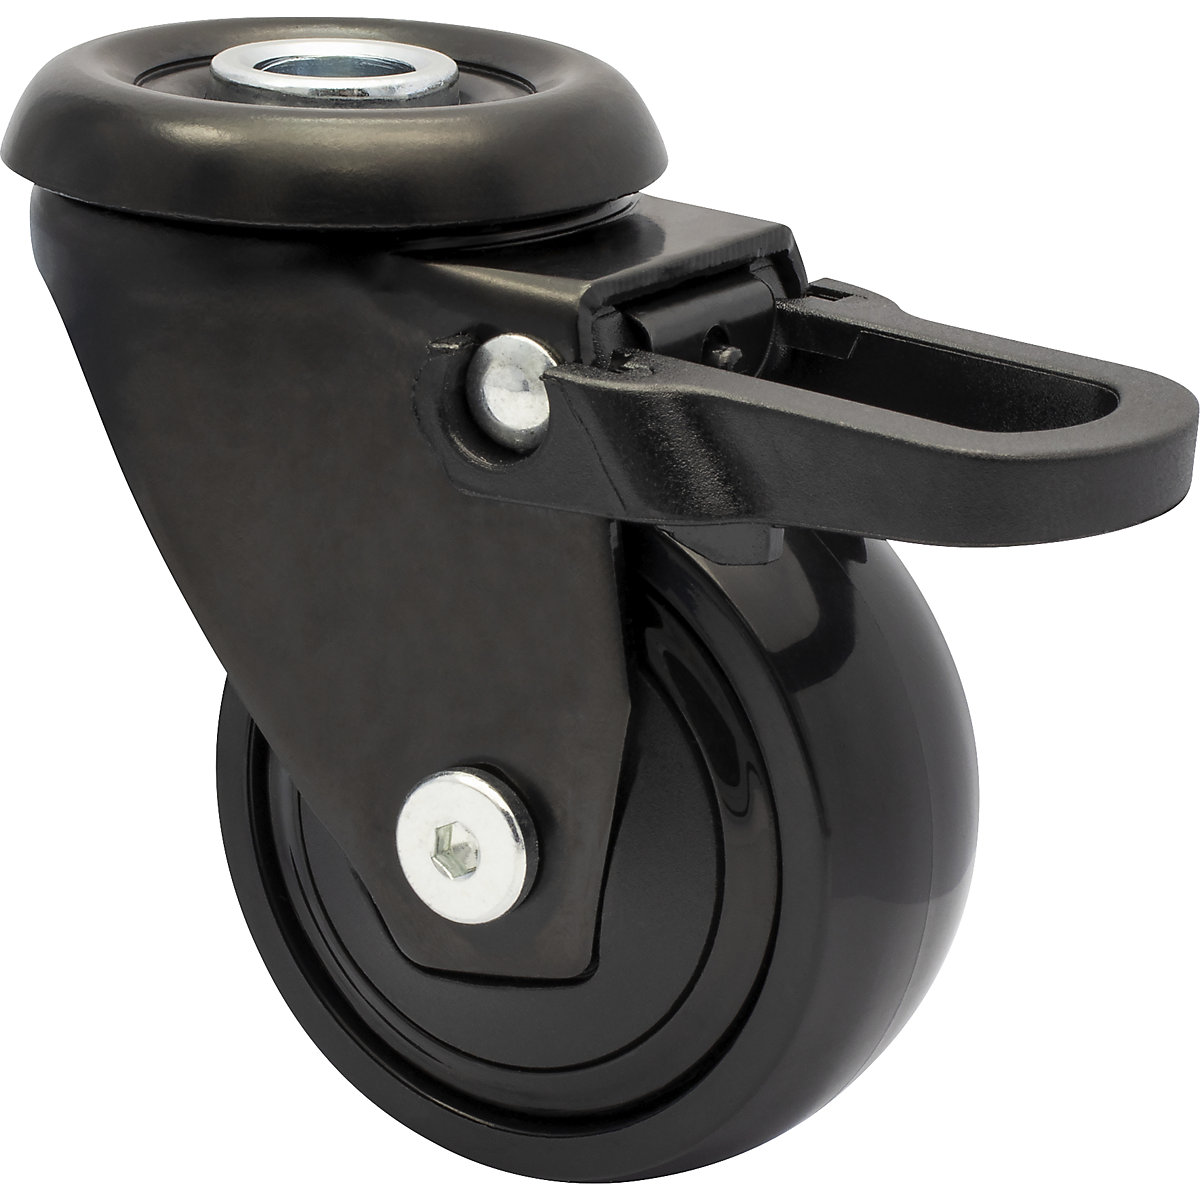 3C series swivel castor for furniture with total wheel stop - Wagner